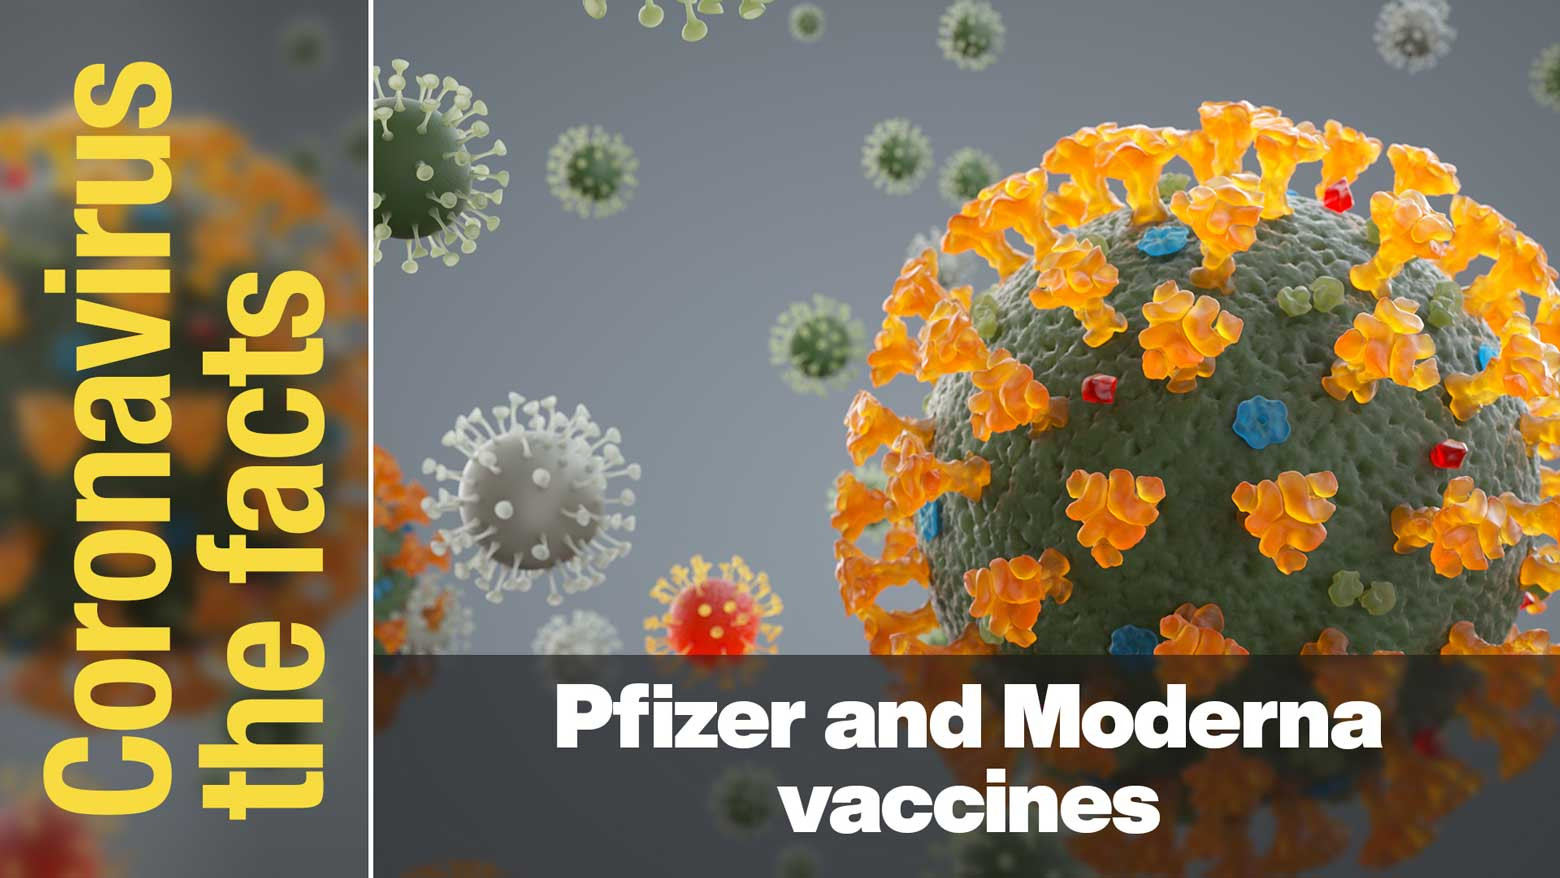 What's the difference between the Pfizer and Moderna vaccines?